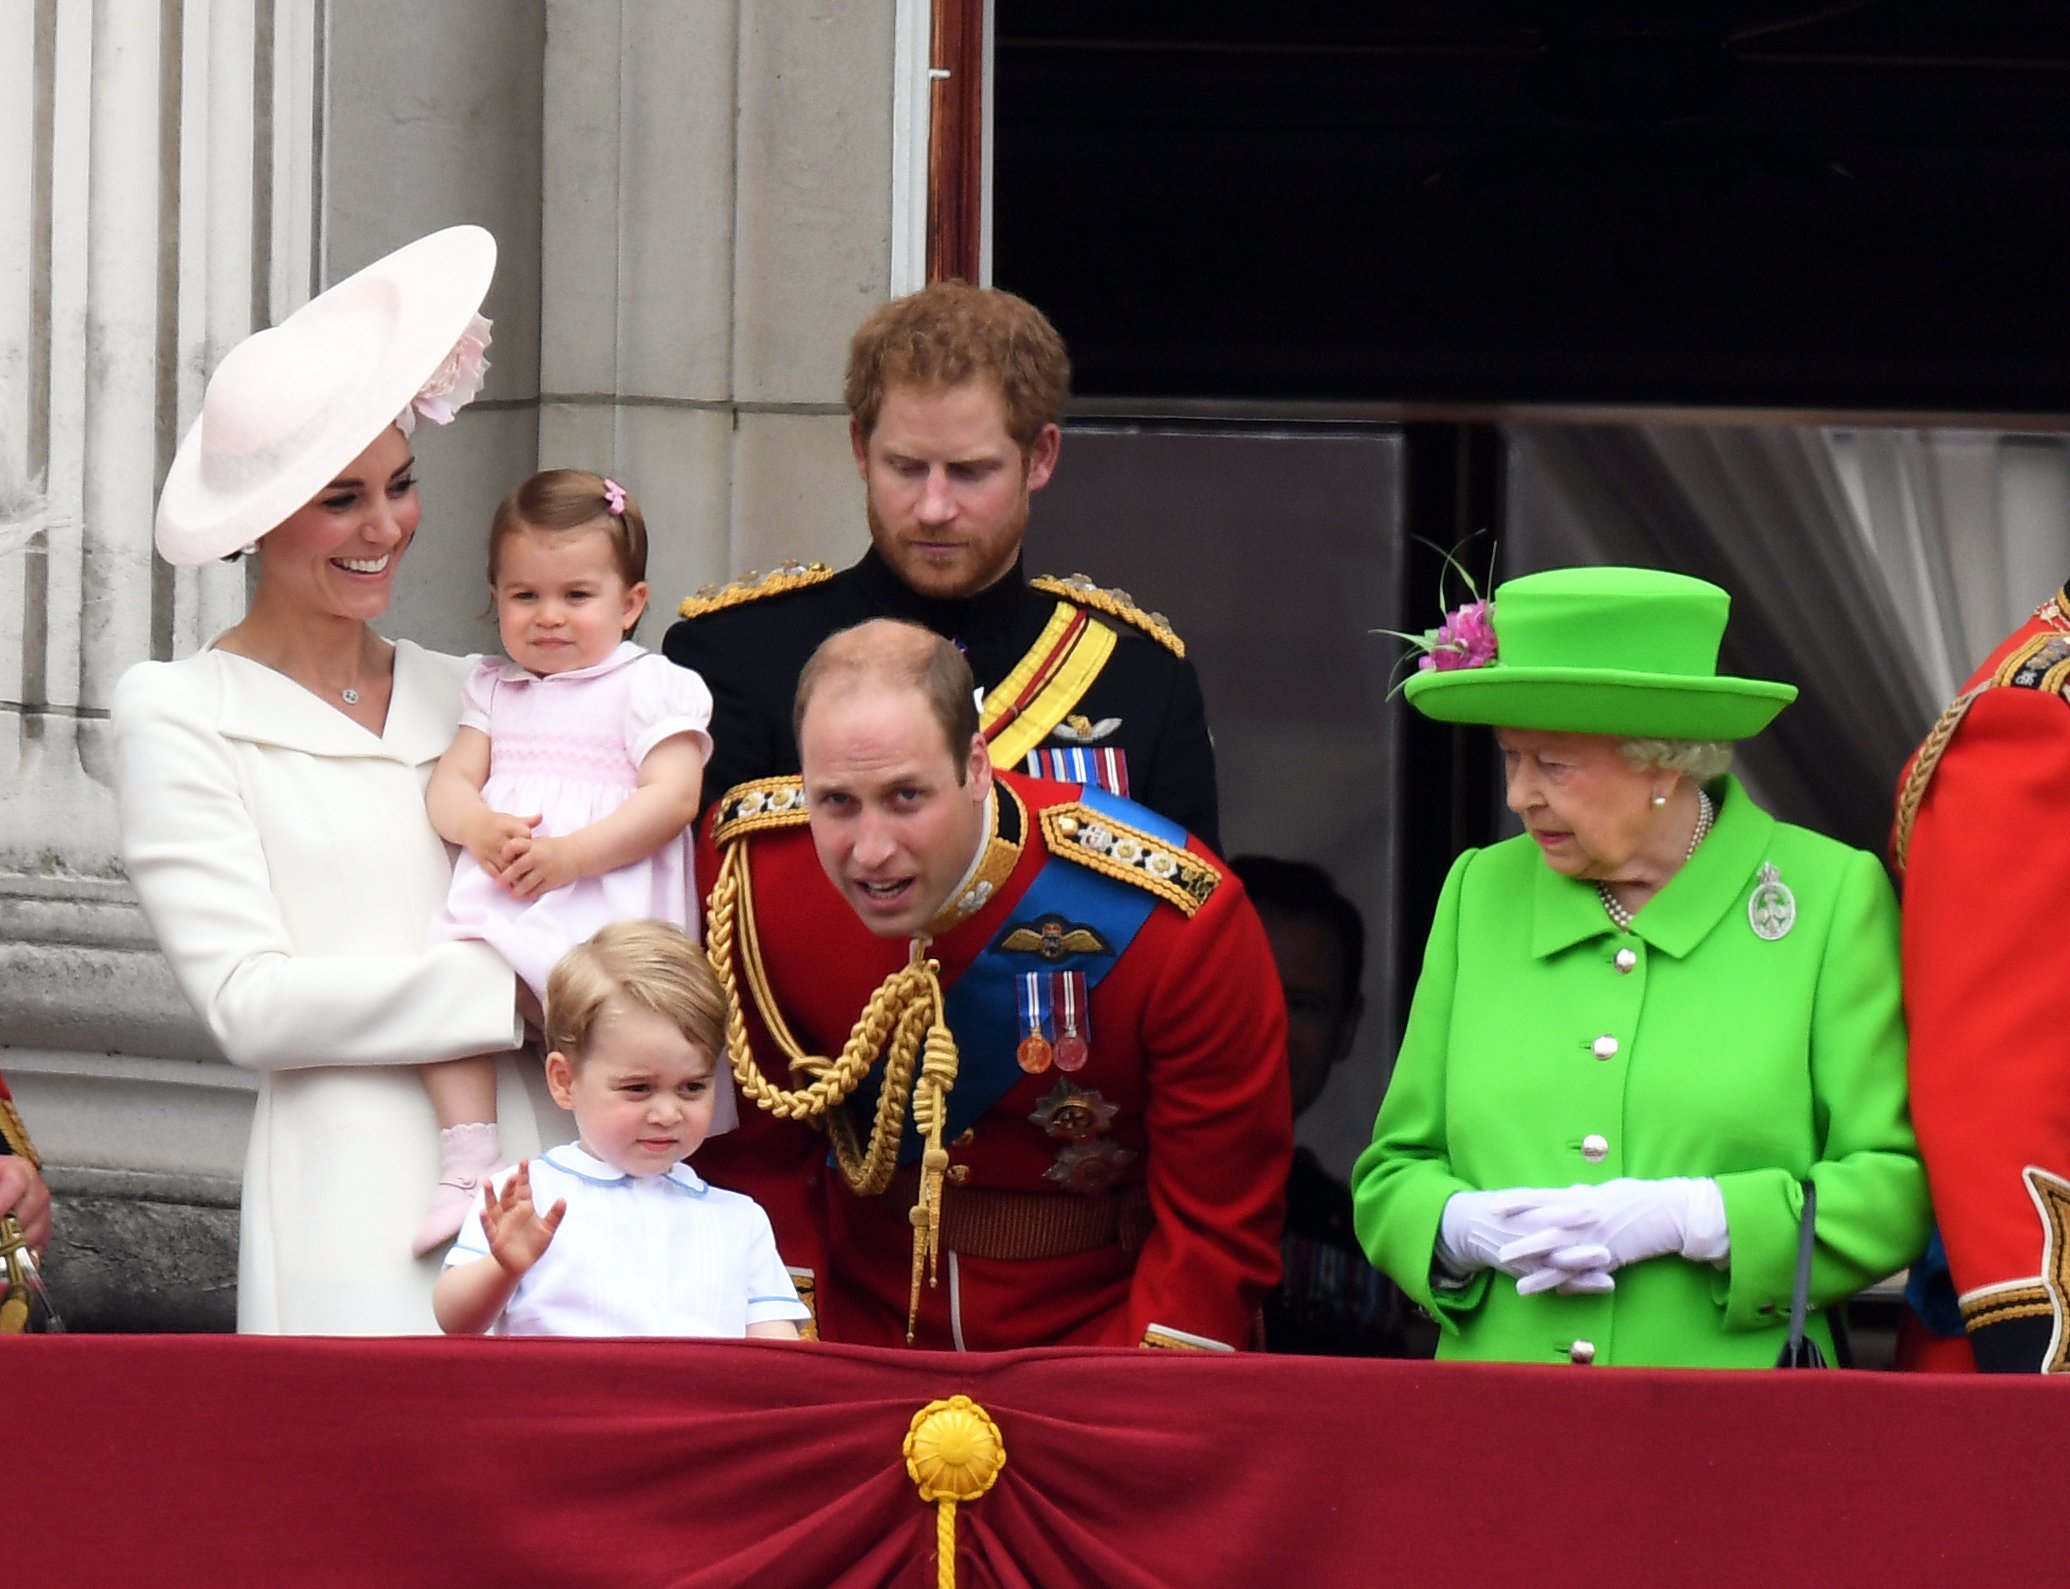 Duchess Kate, Princess Charlotte, Prince George, Prince William, Prince Harry, and Queen Elizabeth ll on the balcony of Buckingham Palace after the Trooping the Colour ceremony on June 11, 2016, in London, England | Source: Getty Images